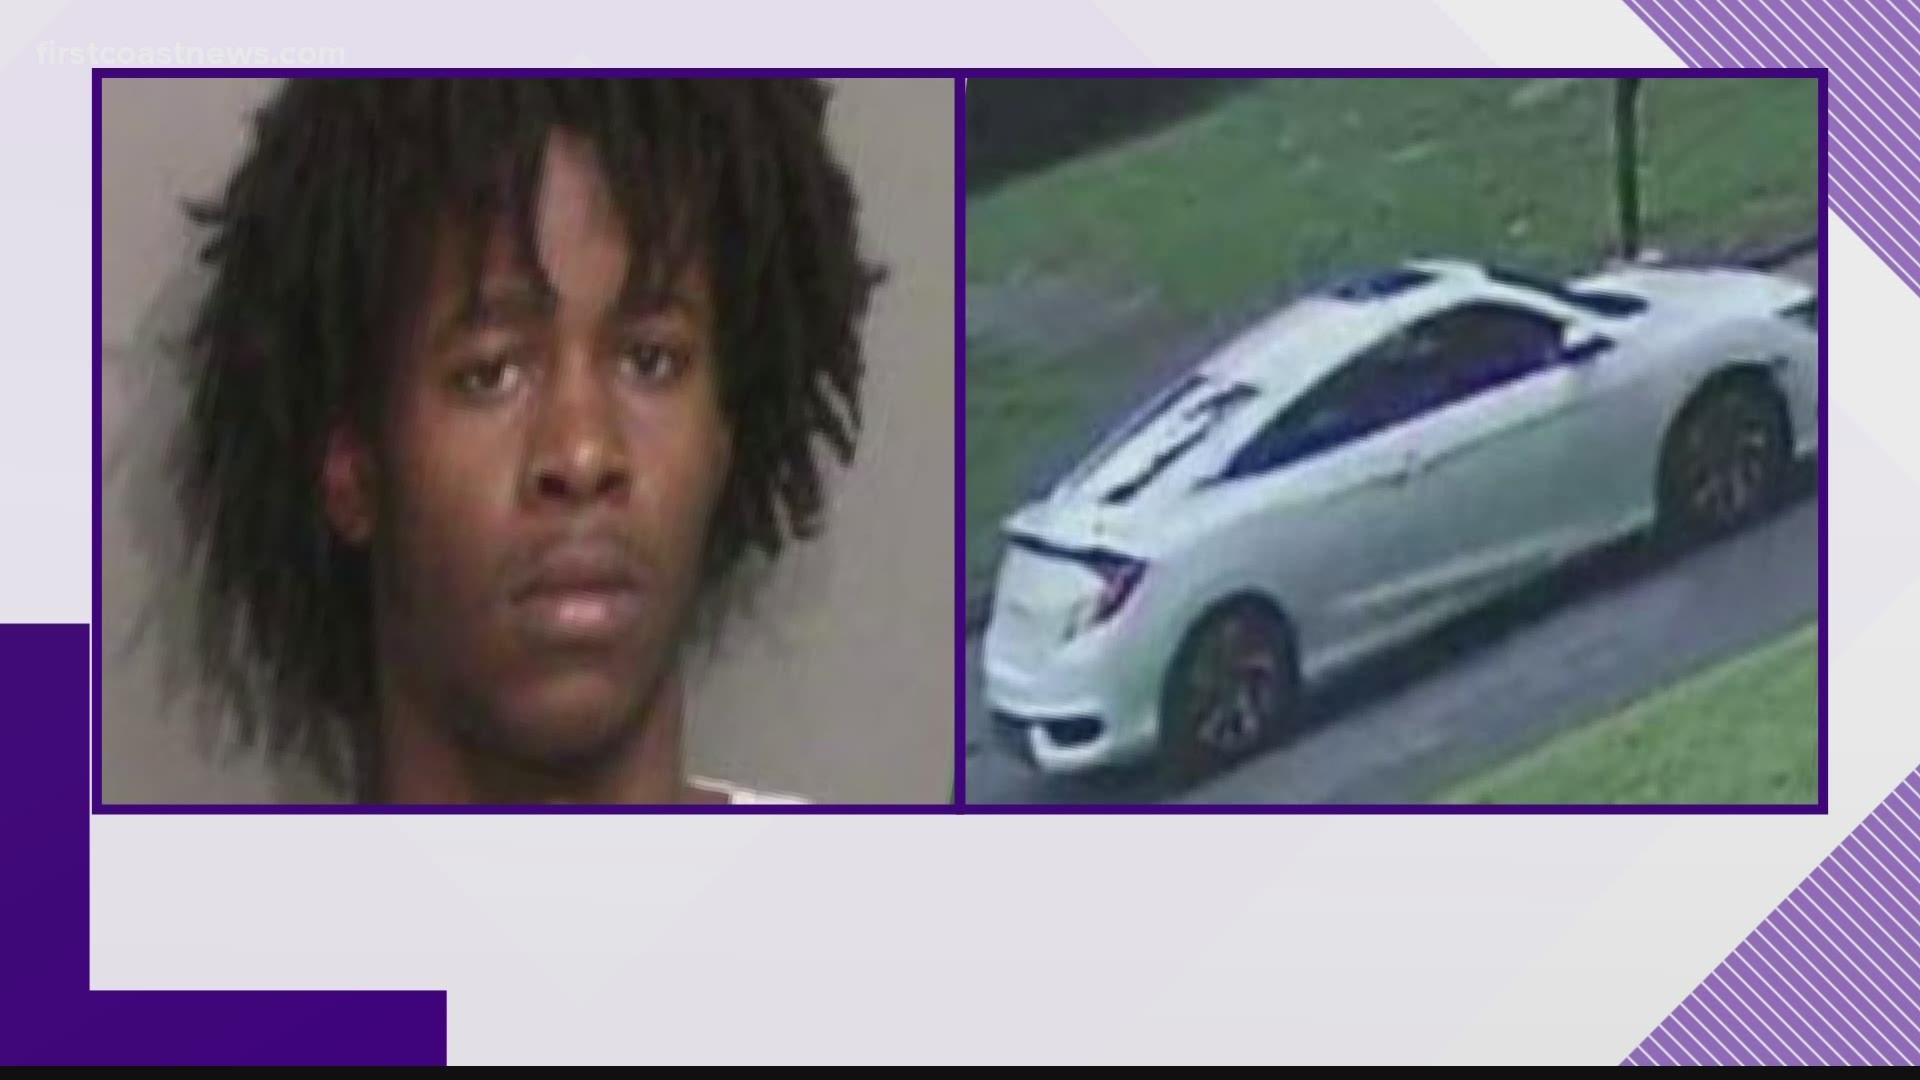 Police say he might be driving a Honda Civic.